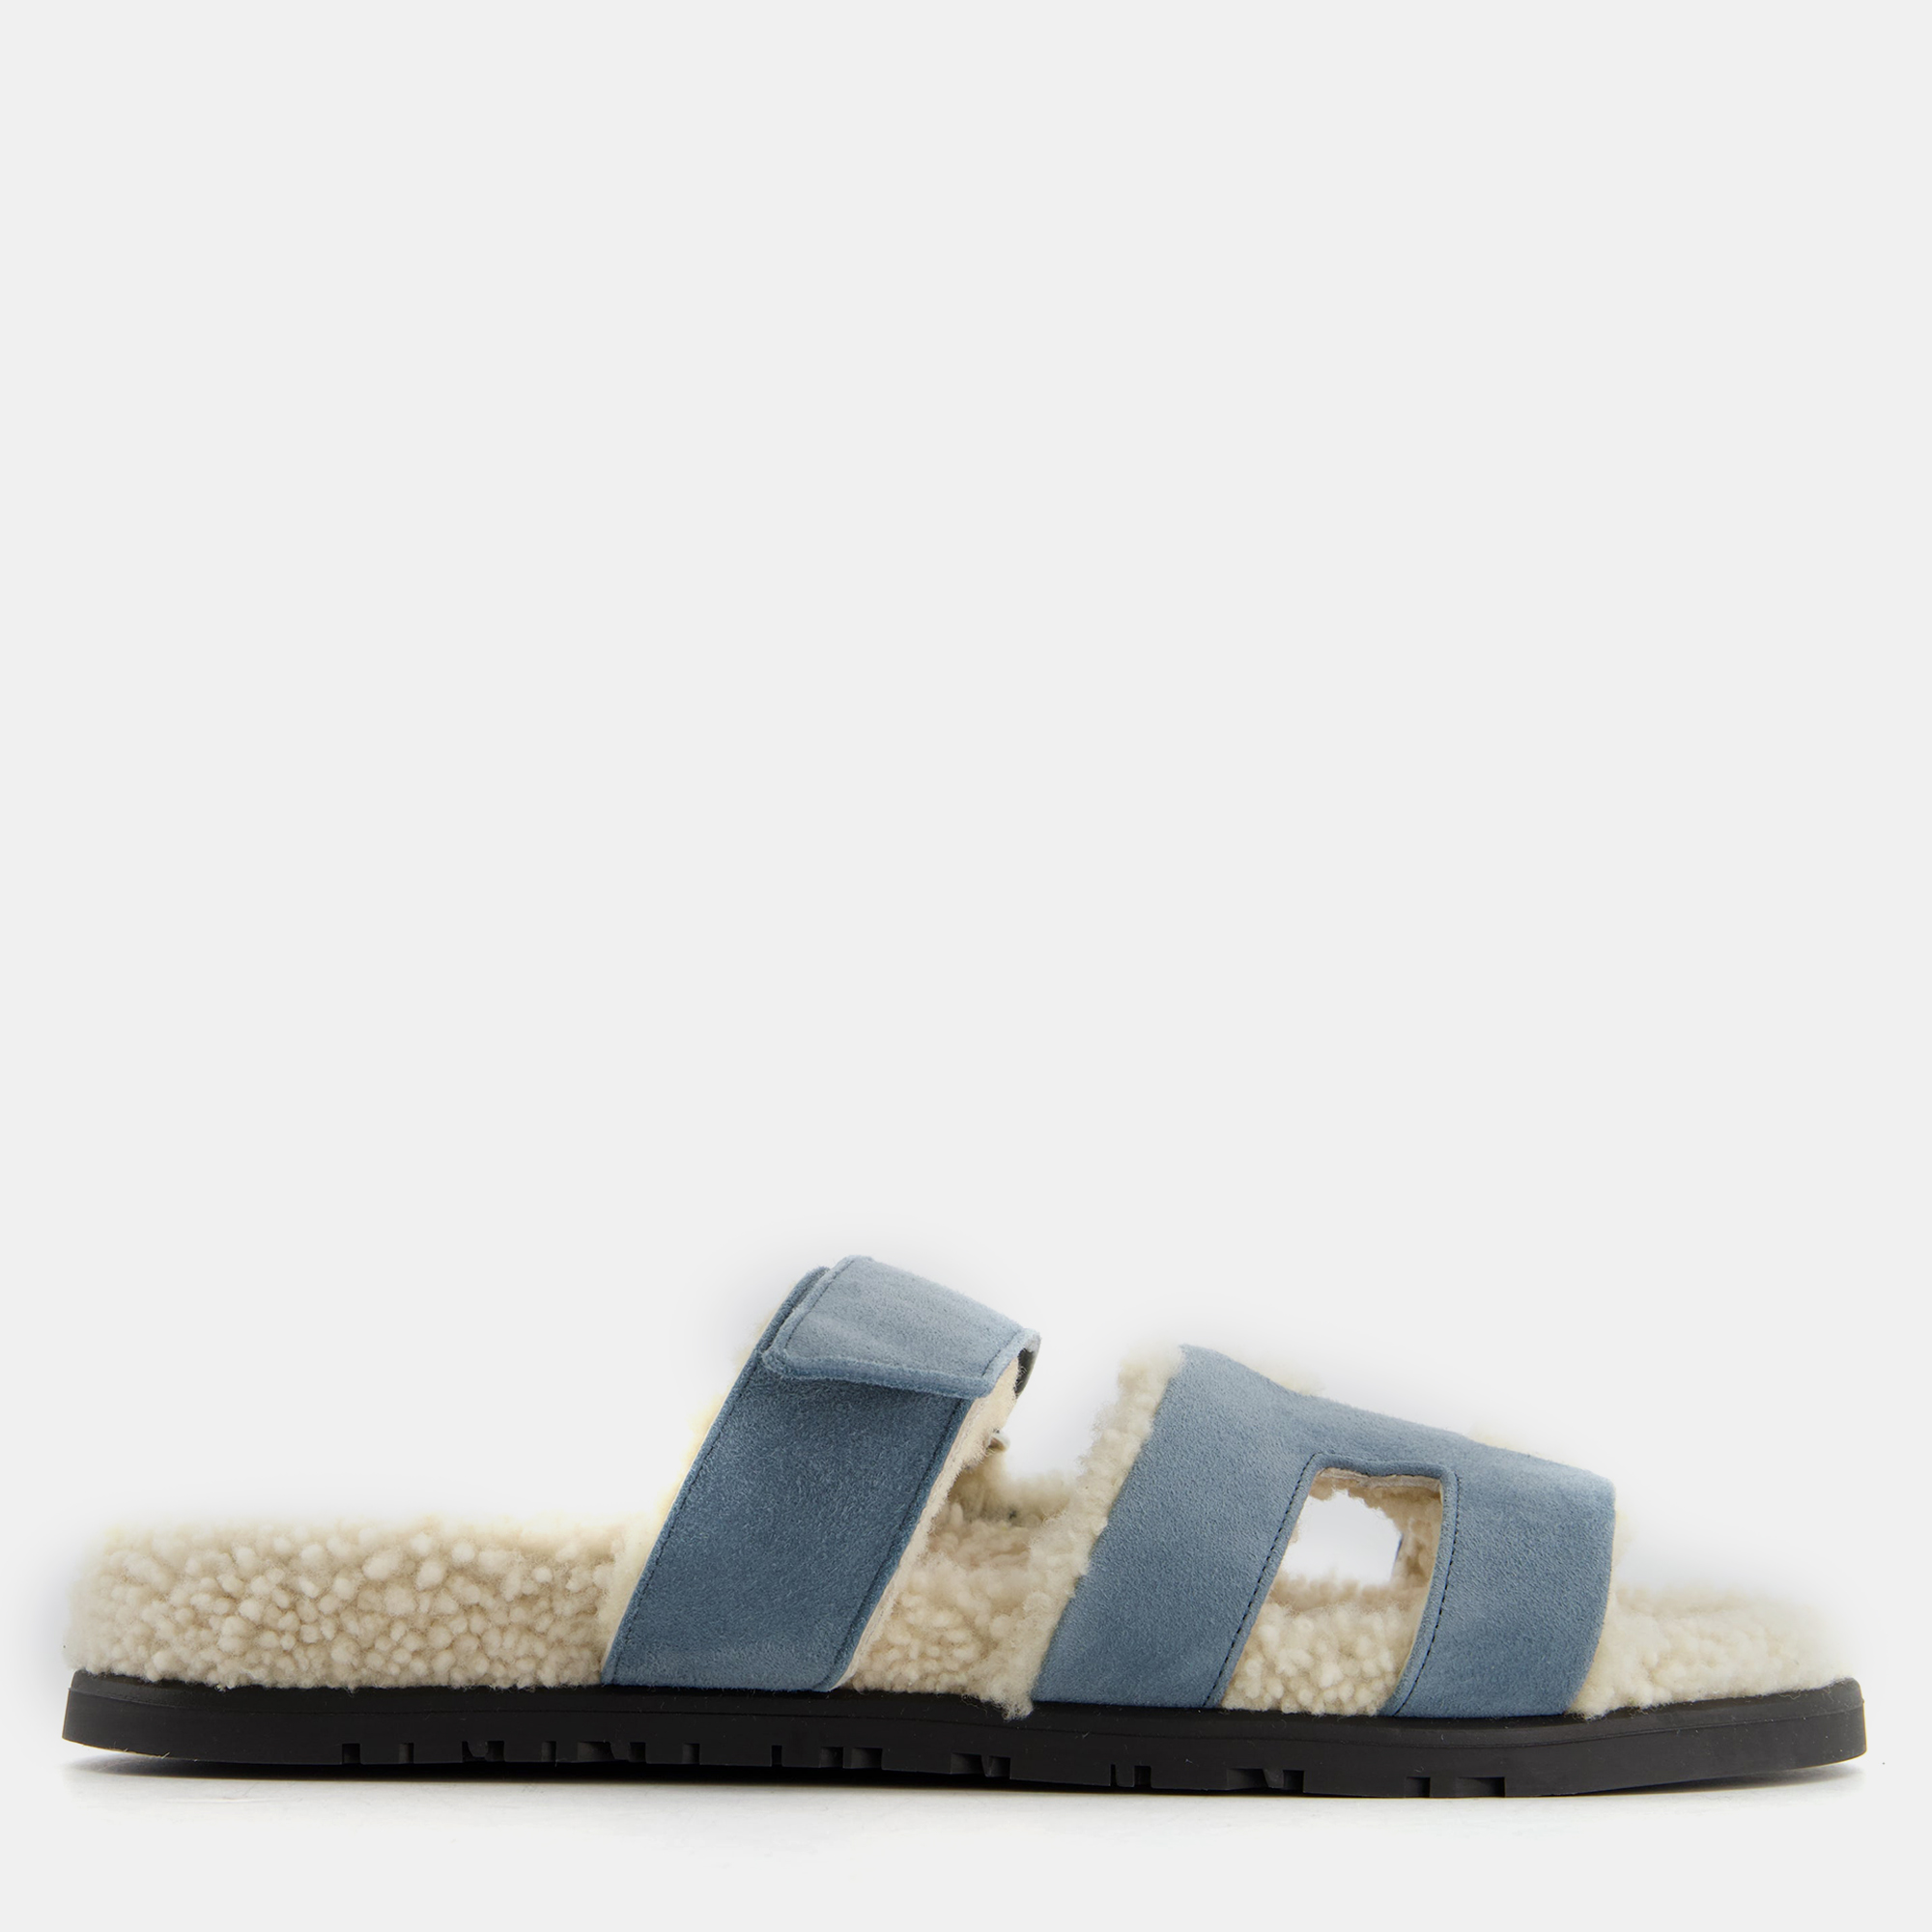 Hermes  blue pinede and ecru shearling chypre sandals size 39